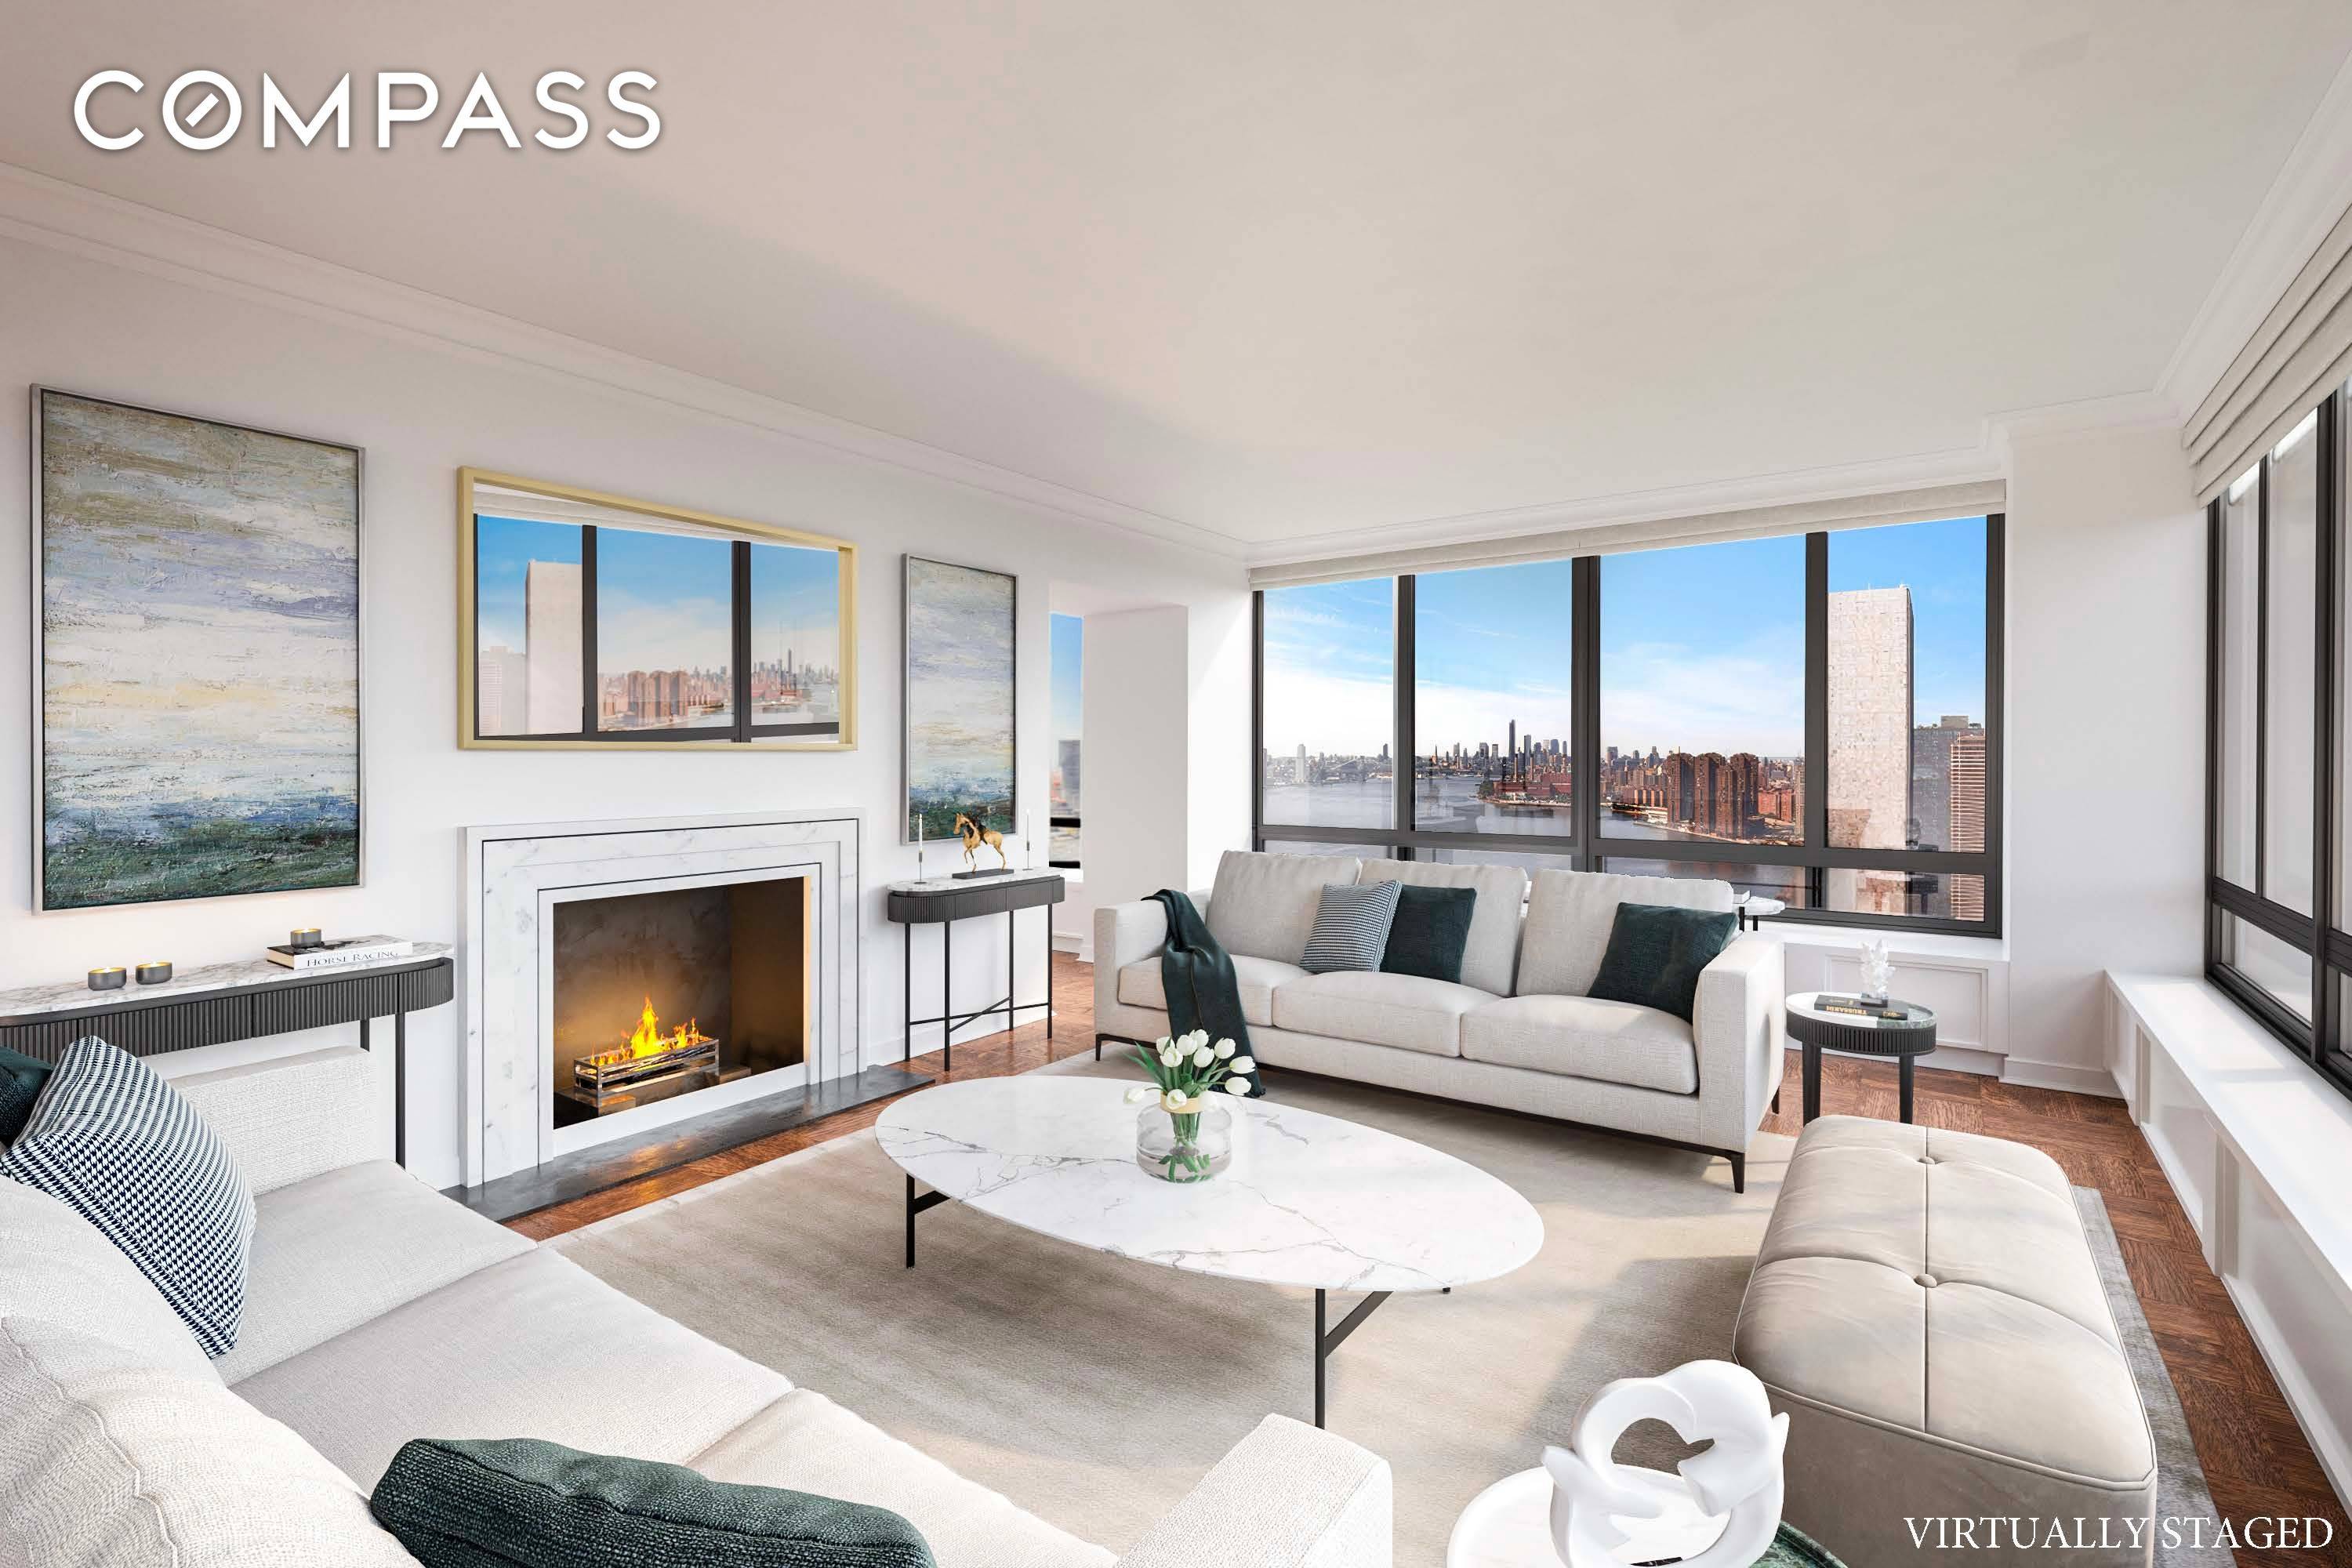 Elegant and Iconic 5 Bedroom Duplex Penthouse on the River The Residence Situated on the 37th and 38th floor of the historically significant 870 UN Plaza is this magnificent duplex ...